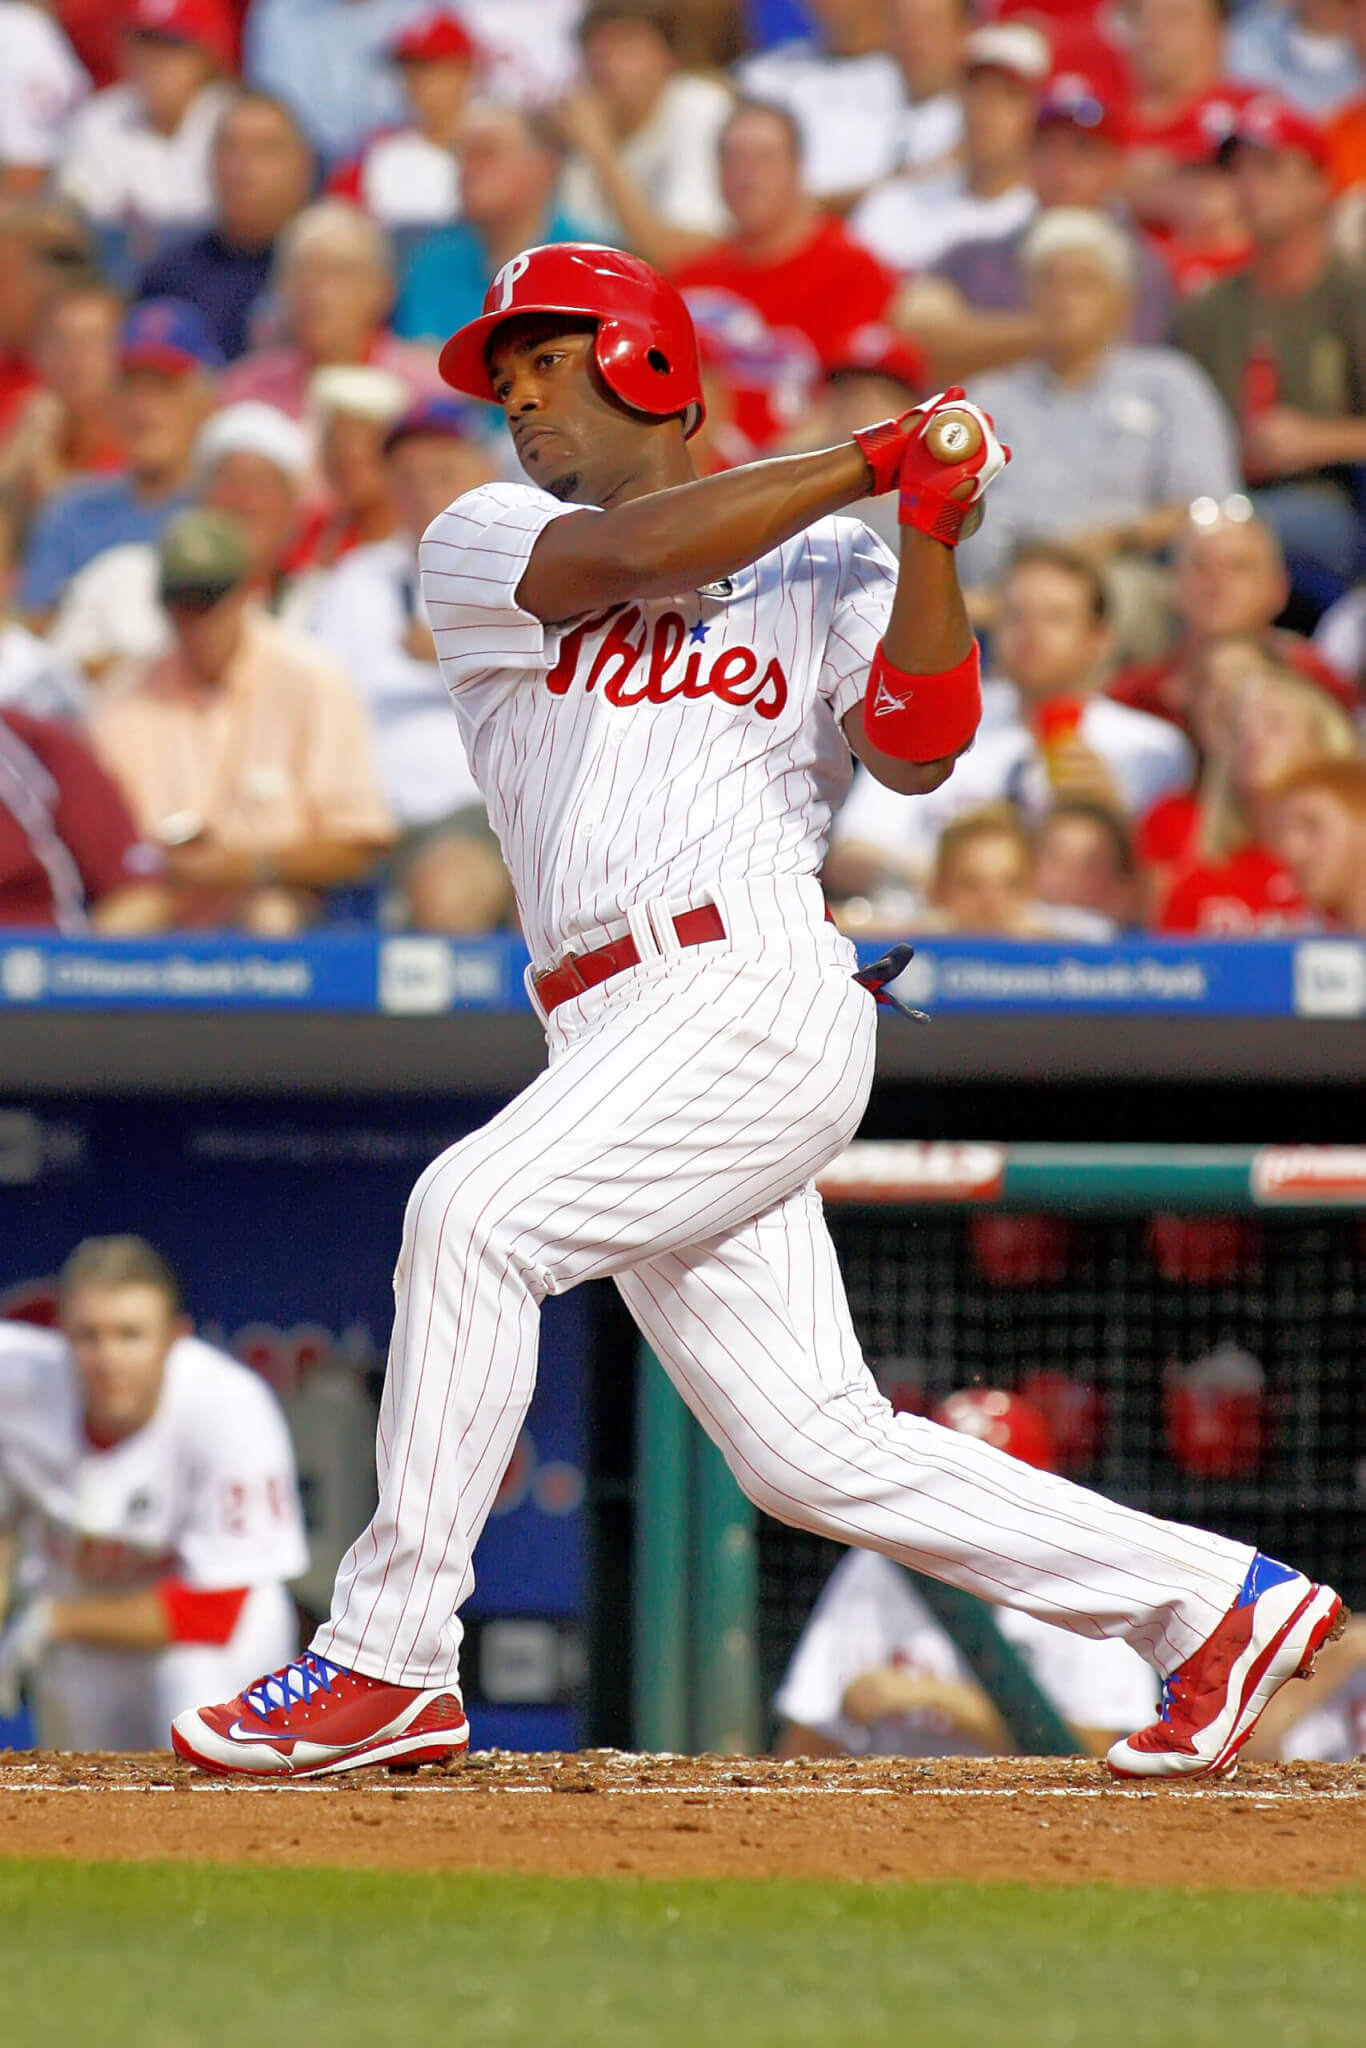 Jimmy Rollins up to bat during the Diamondbacks and Phillie's game at Citizens Bank Park on August 20, 2009